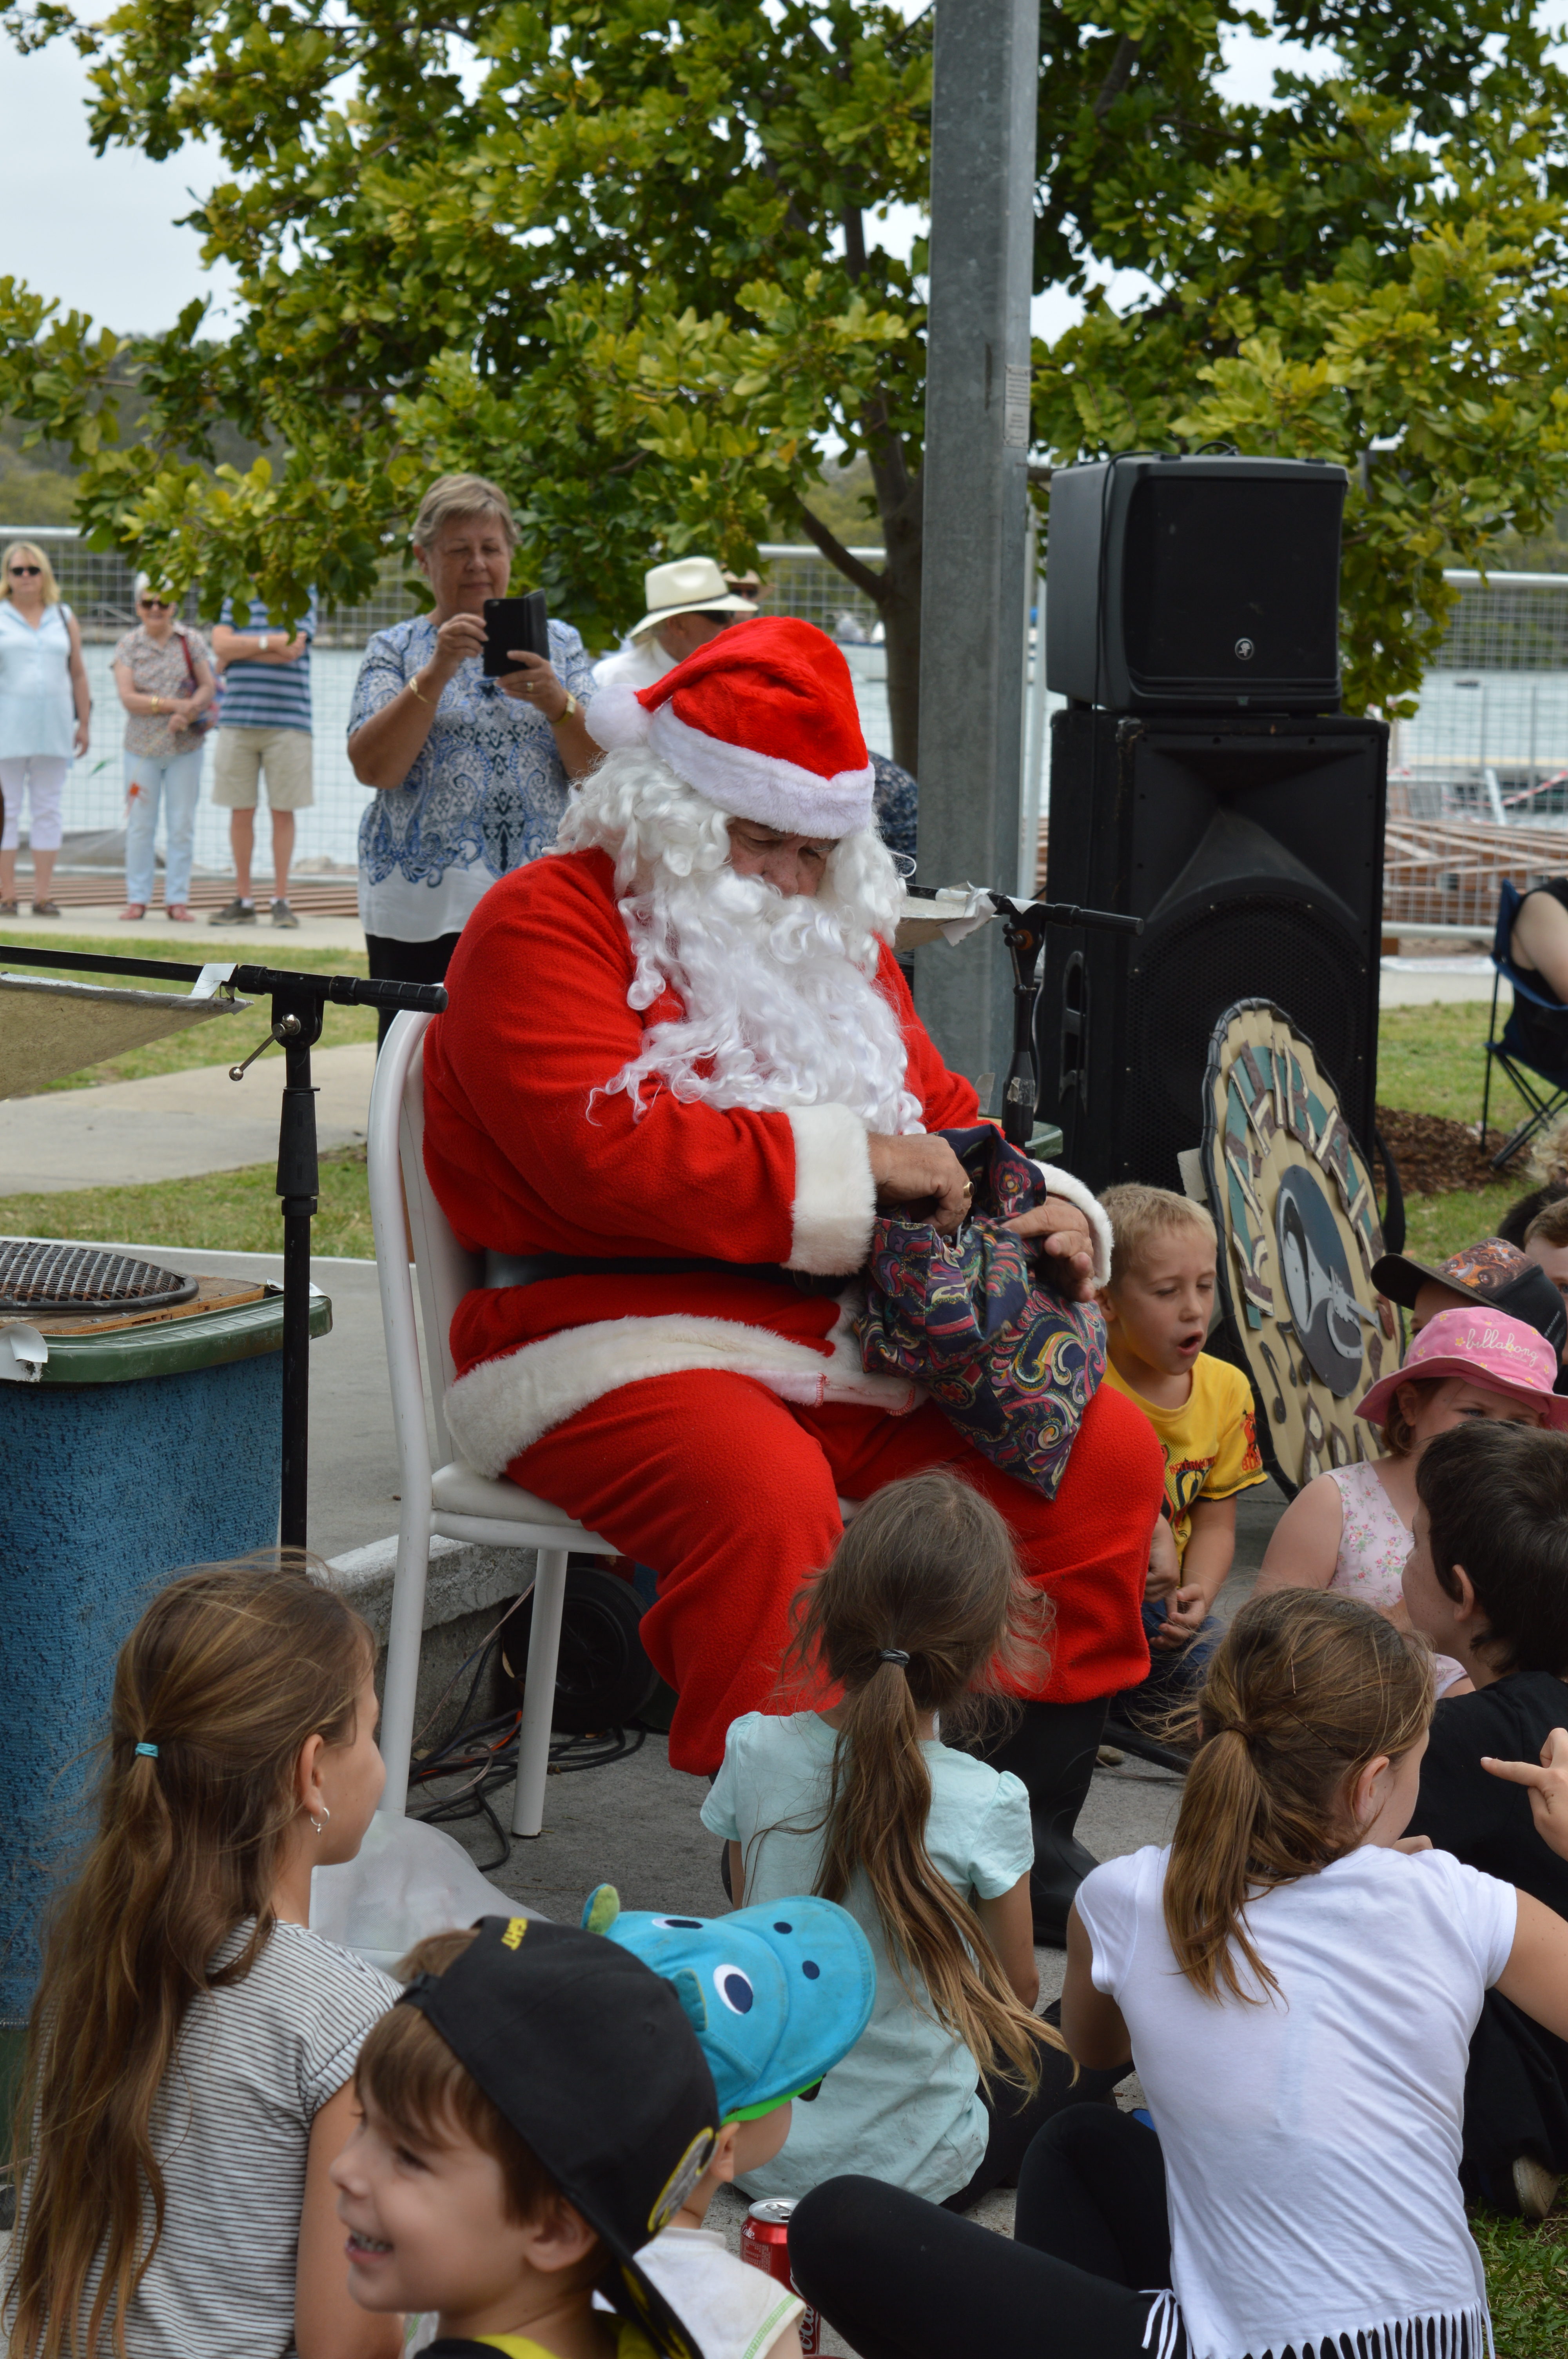 Santa hands out sweets to children after arriving on a Marine Rescue NSW boat.